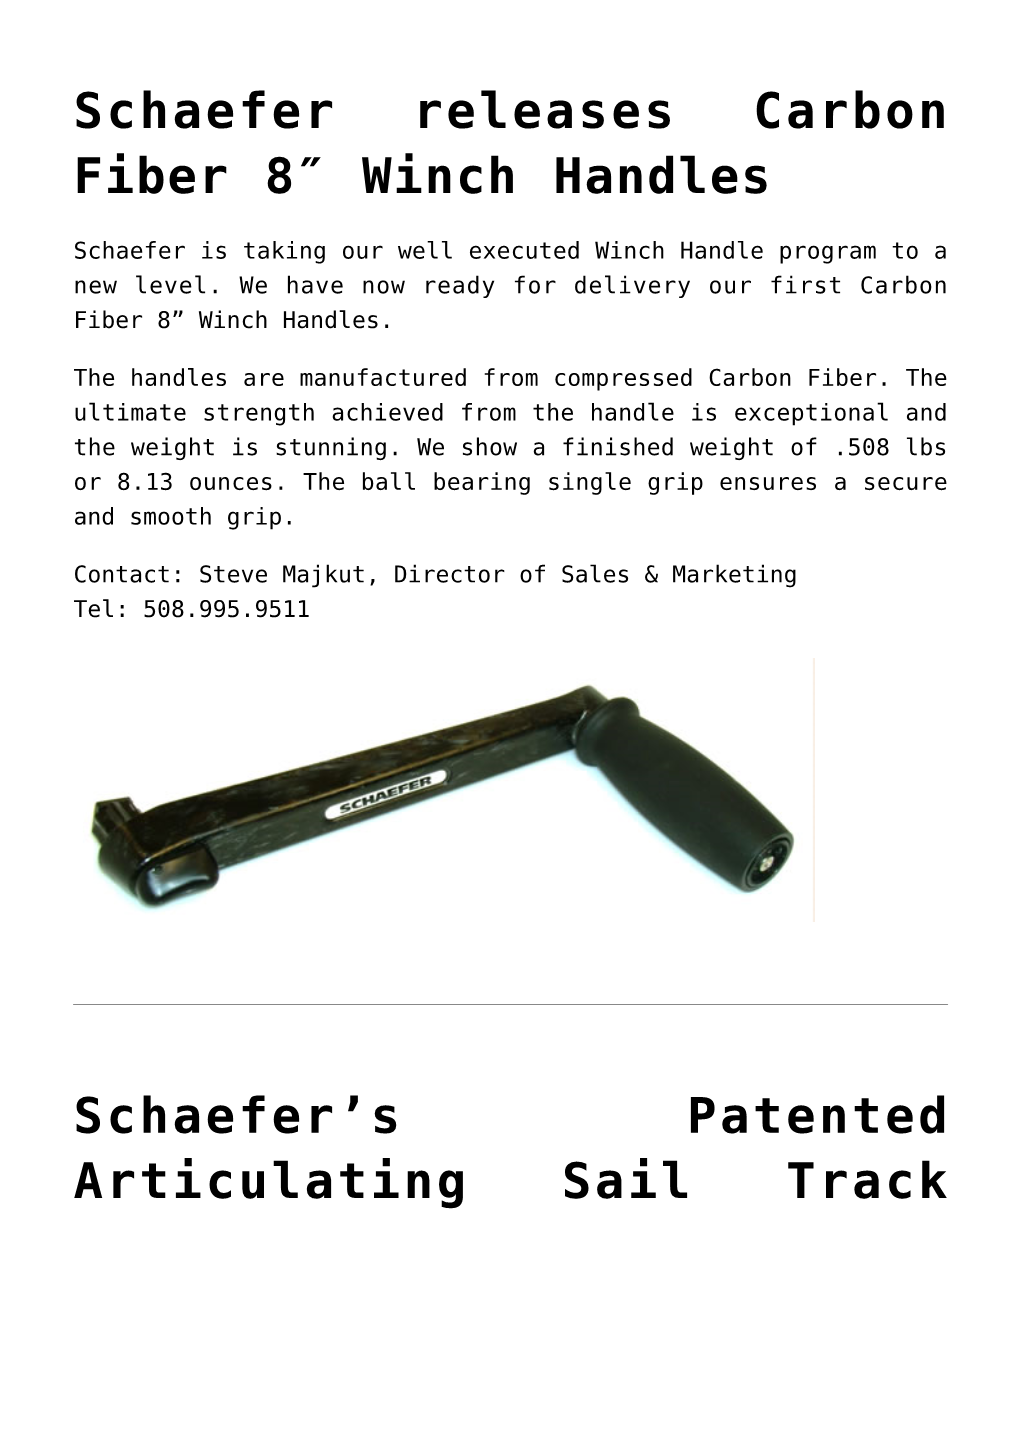 Winch Handles,Schaefer's Patented Articulating Sail